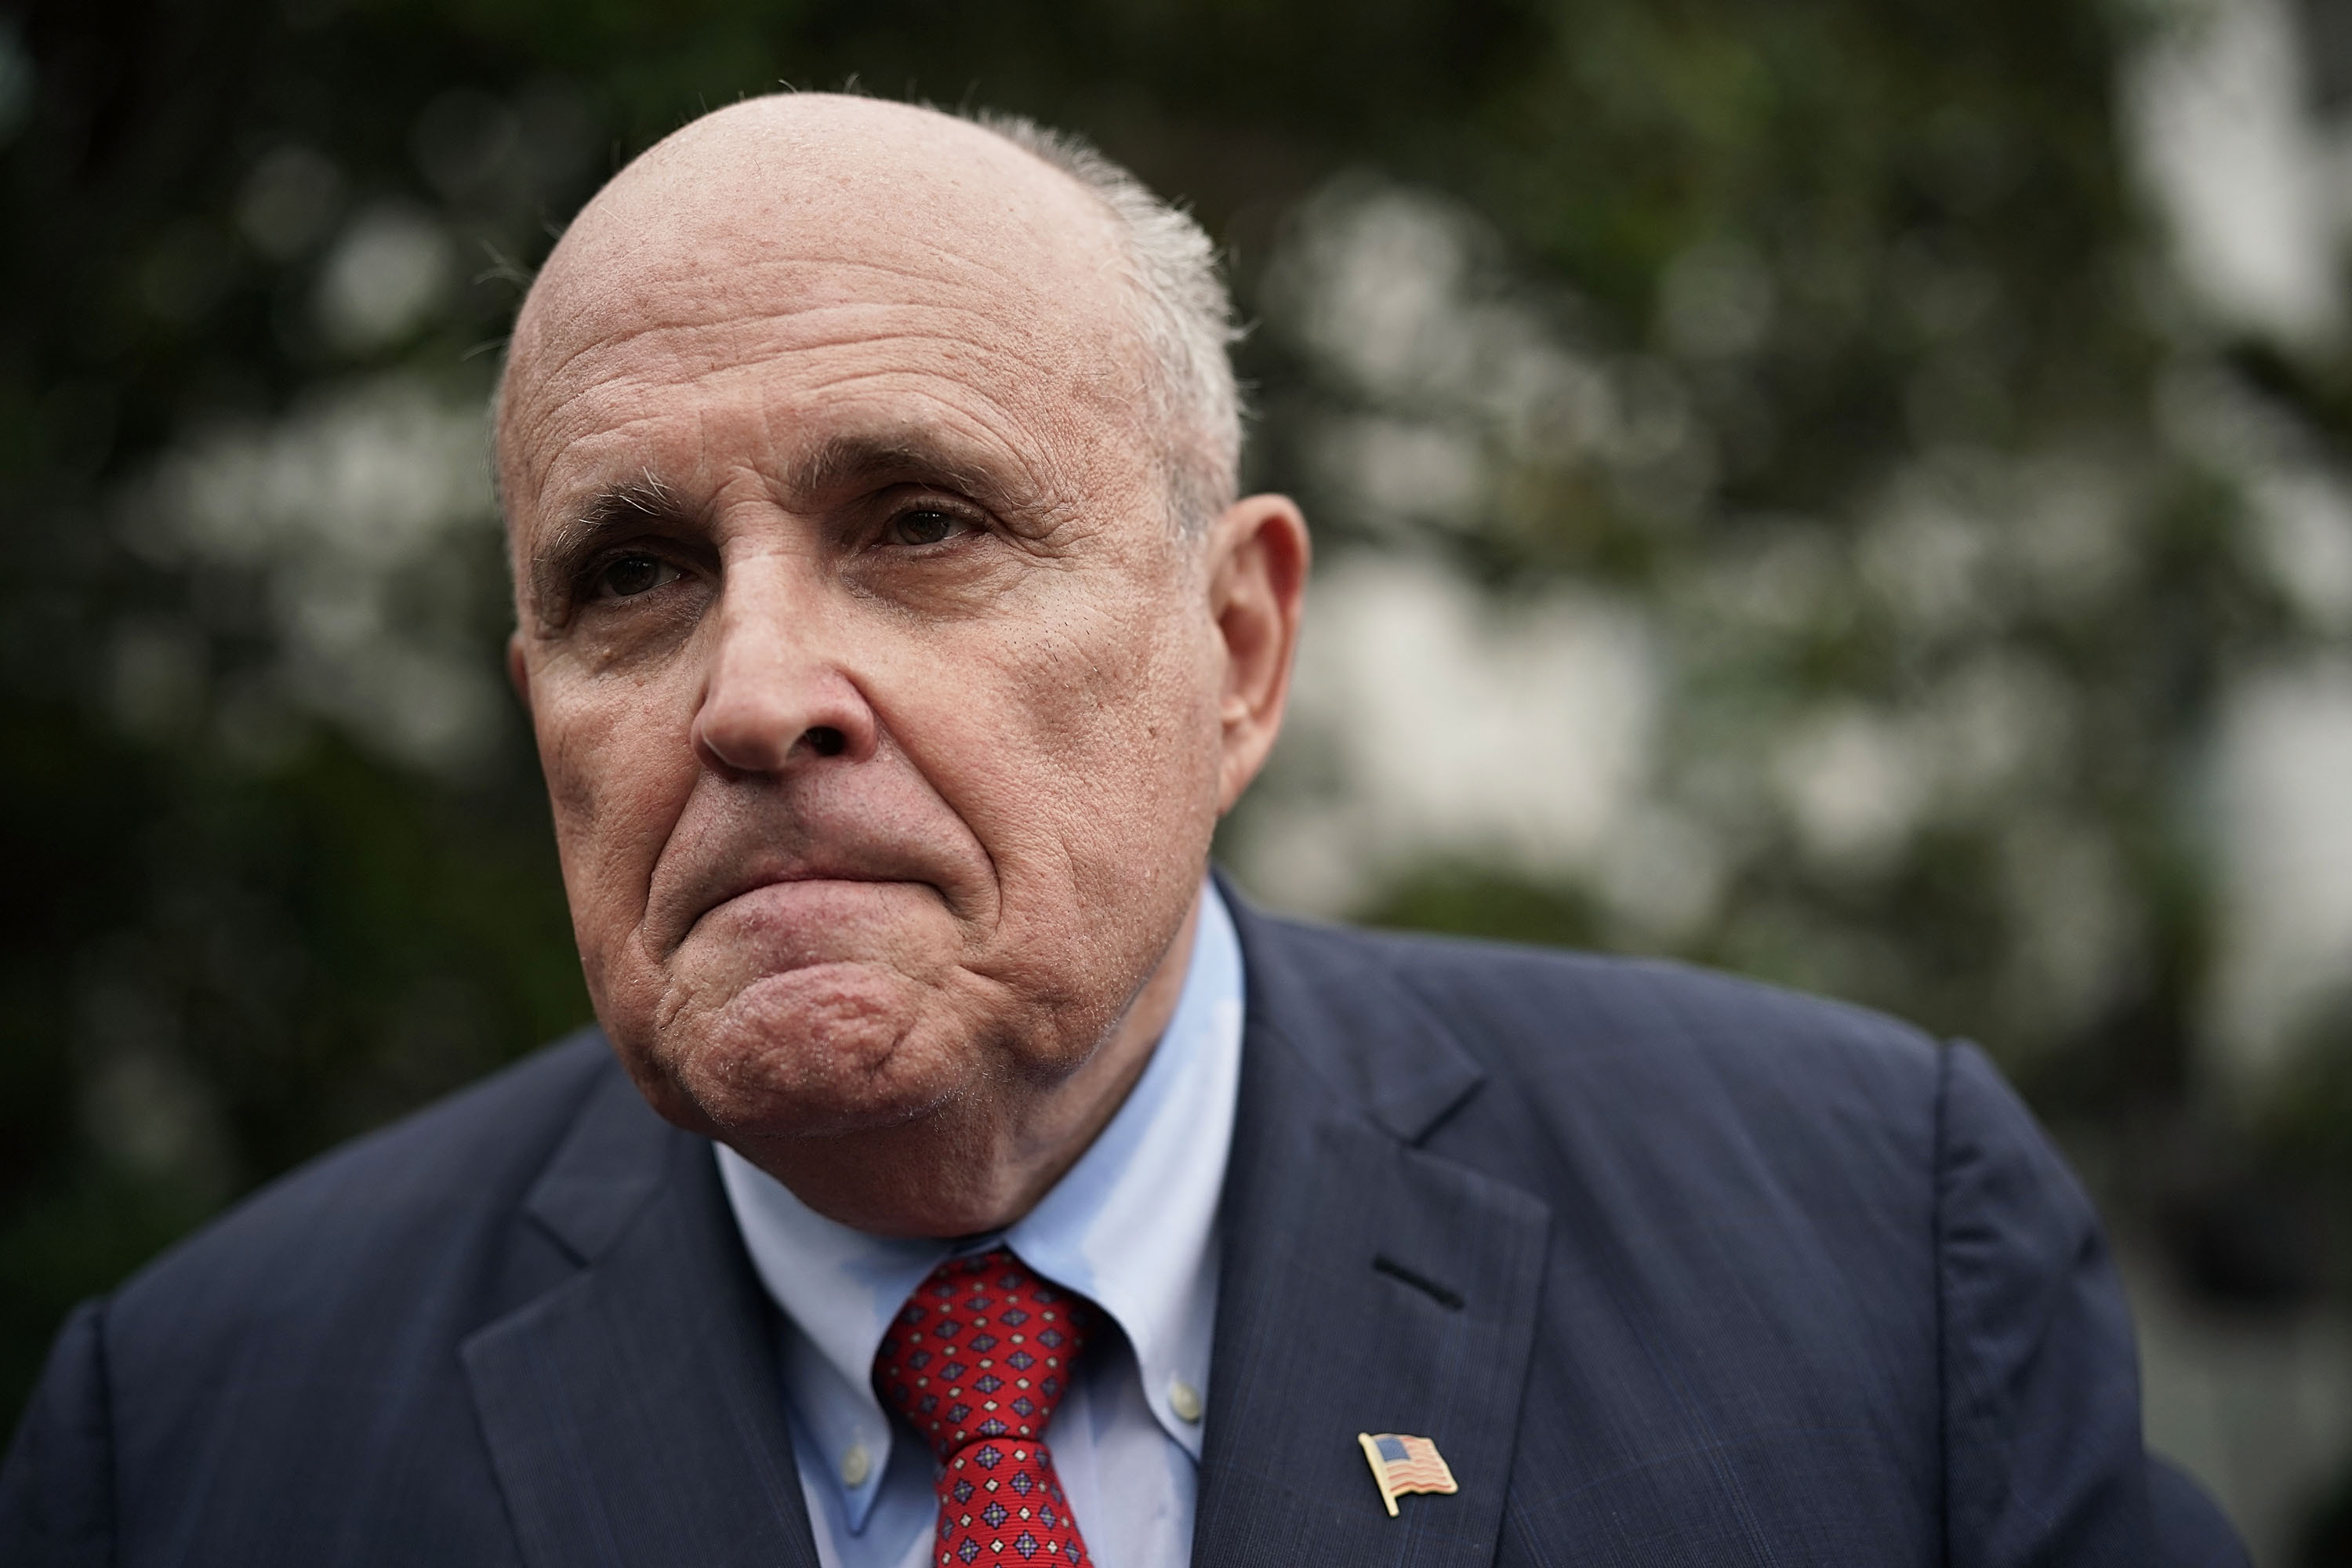 Rudy Giuliani&nbsp;speaks to members of the media at the White House May 30, 2018 in Washington, DC.